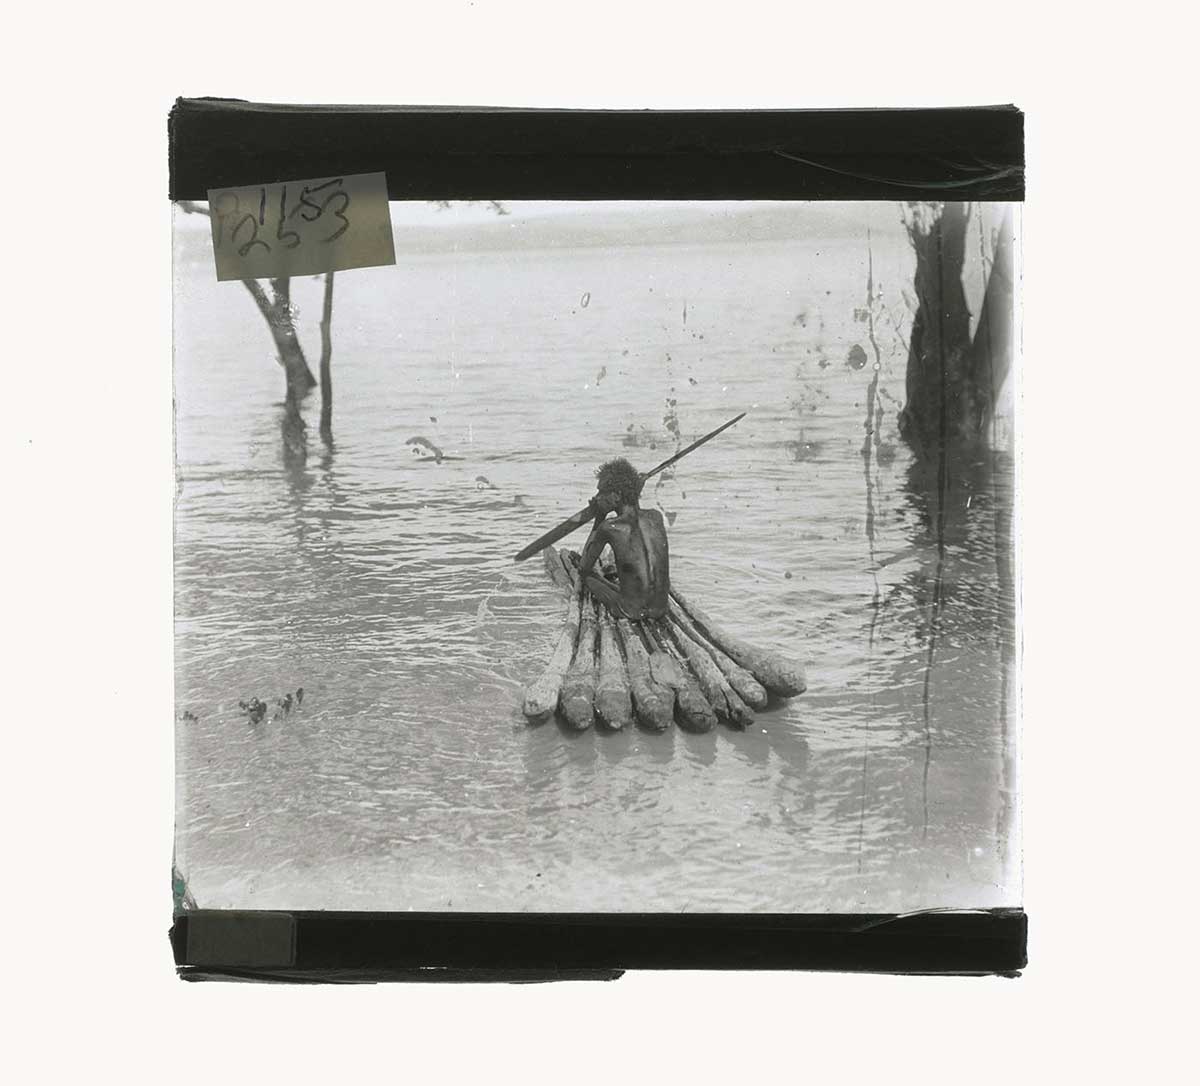 A young Worora man paddling on a raft made from mangrove trees, George Water, Western Australia 1916. The raft is made up of eight tree sections tied together. The young man holds a paddle-like implement in one hand; he has his back to the camera. Partly submerged tree trunks are ahead to the left and right. The water's surface is lightly rippled. - click to view larger image